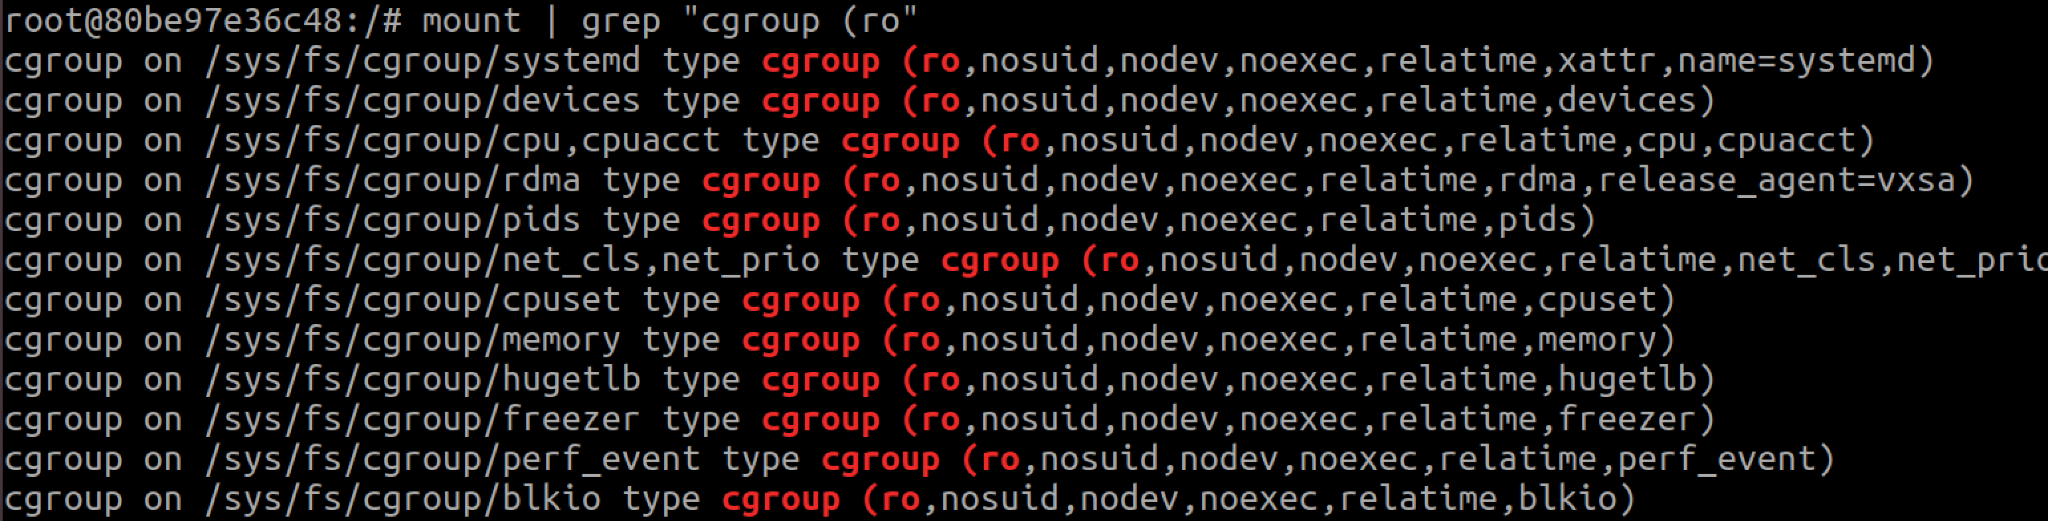 Cgroupfs mounts inside containers are read-only ("ro"). A malicious container that wants to exploit CVE-2022-0492 must mount another, writable cgroupfs.